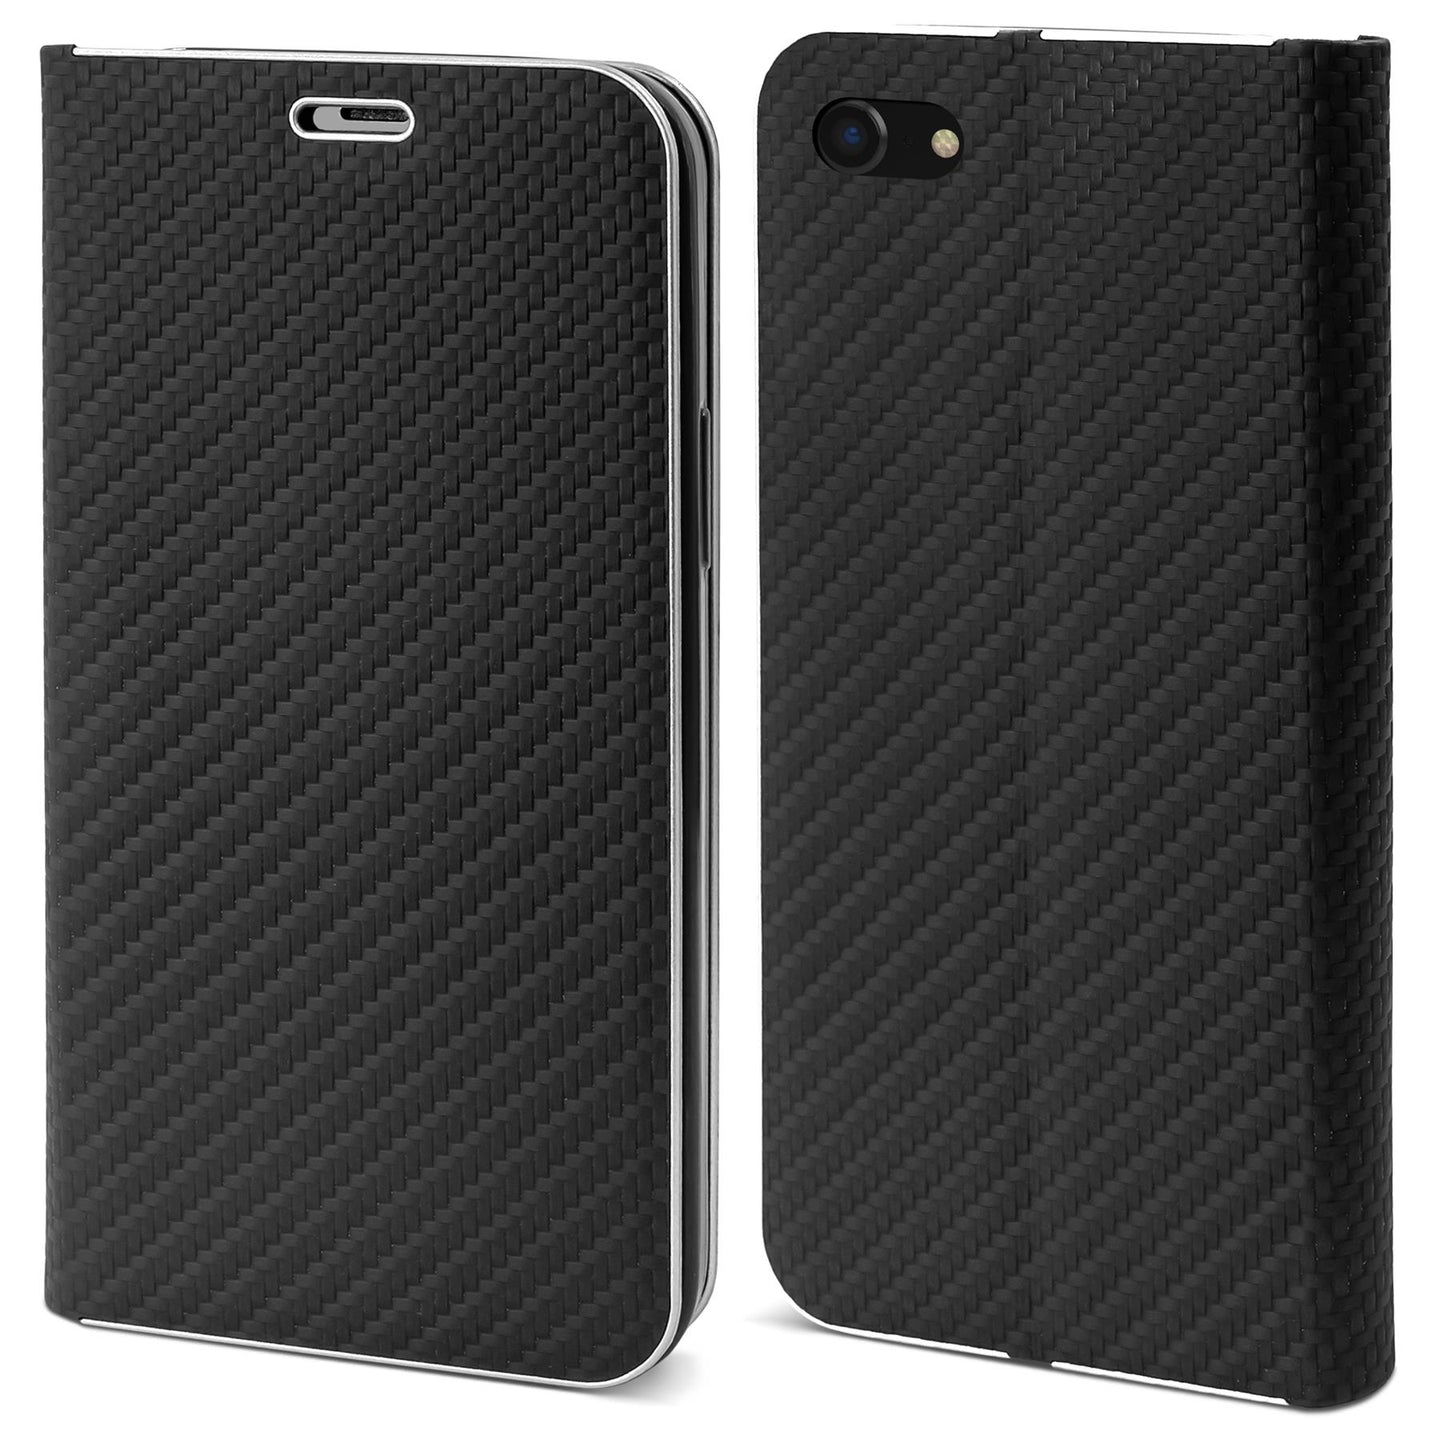 Moozy Wallet Case for iPhone SE 2020, iPhone 7, iPhone 8, Black Carbon – Metallic Edge Protection Magnetic Closure Flip Cover with Card Holder